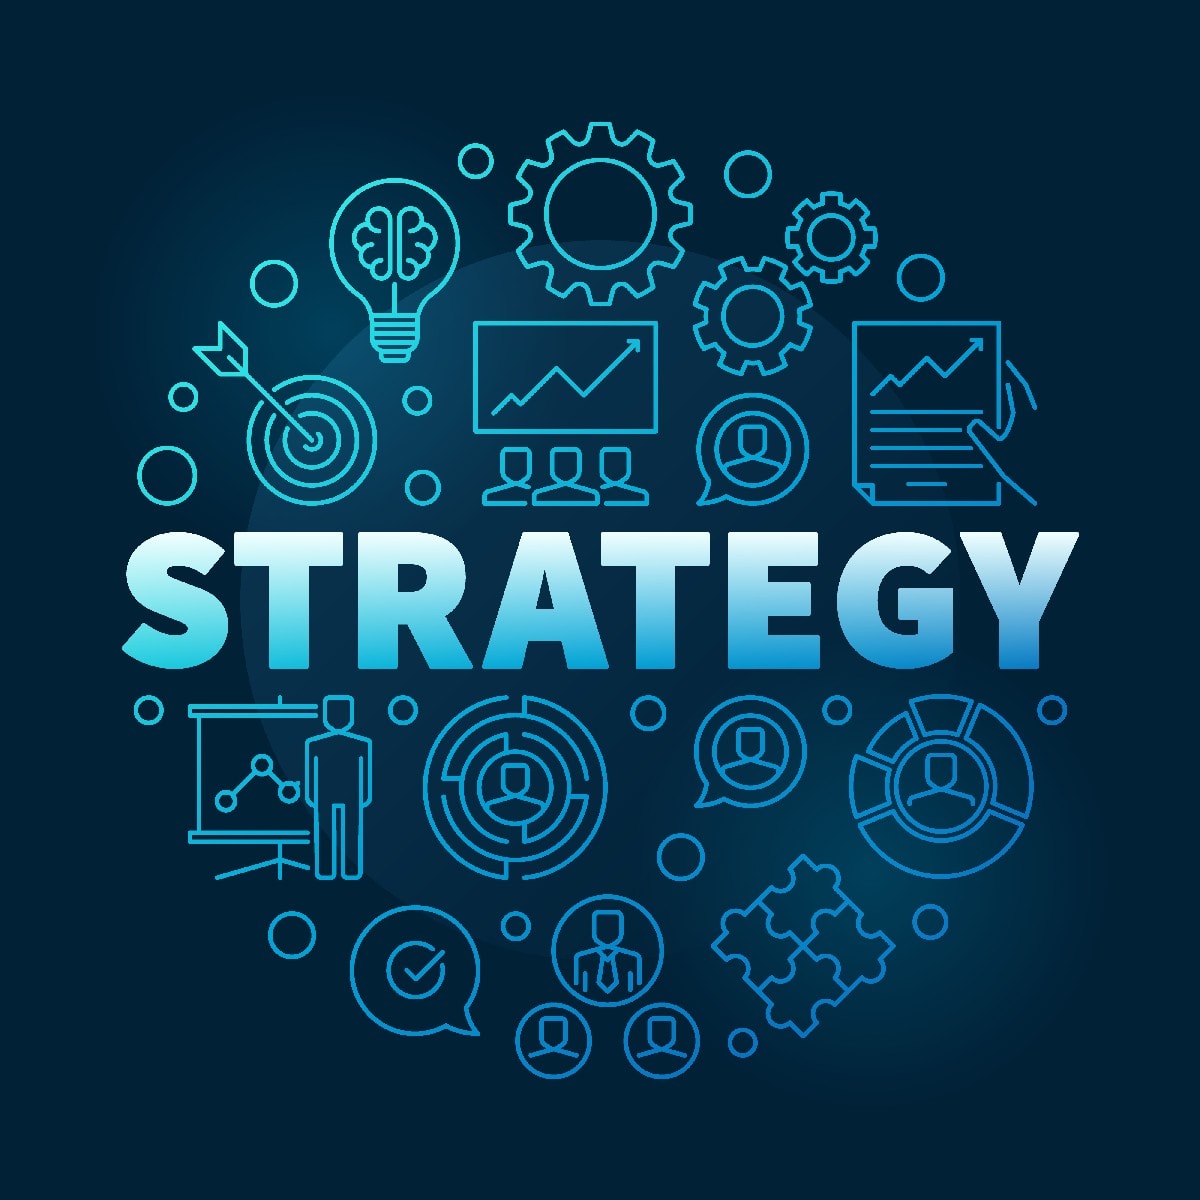 Strategy Definition – What Is Strategy? | Marketing91